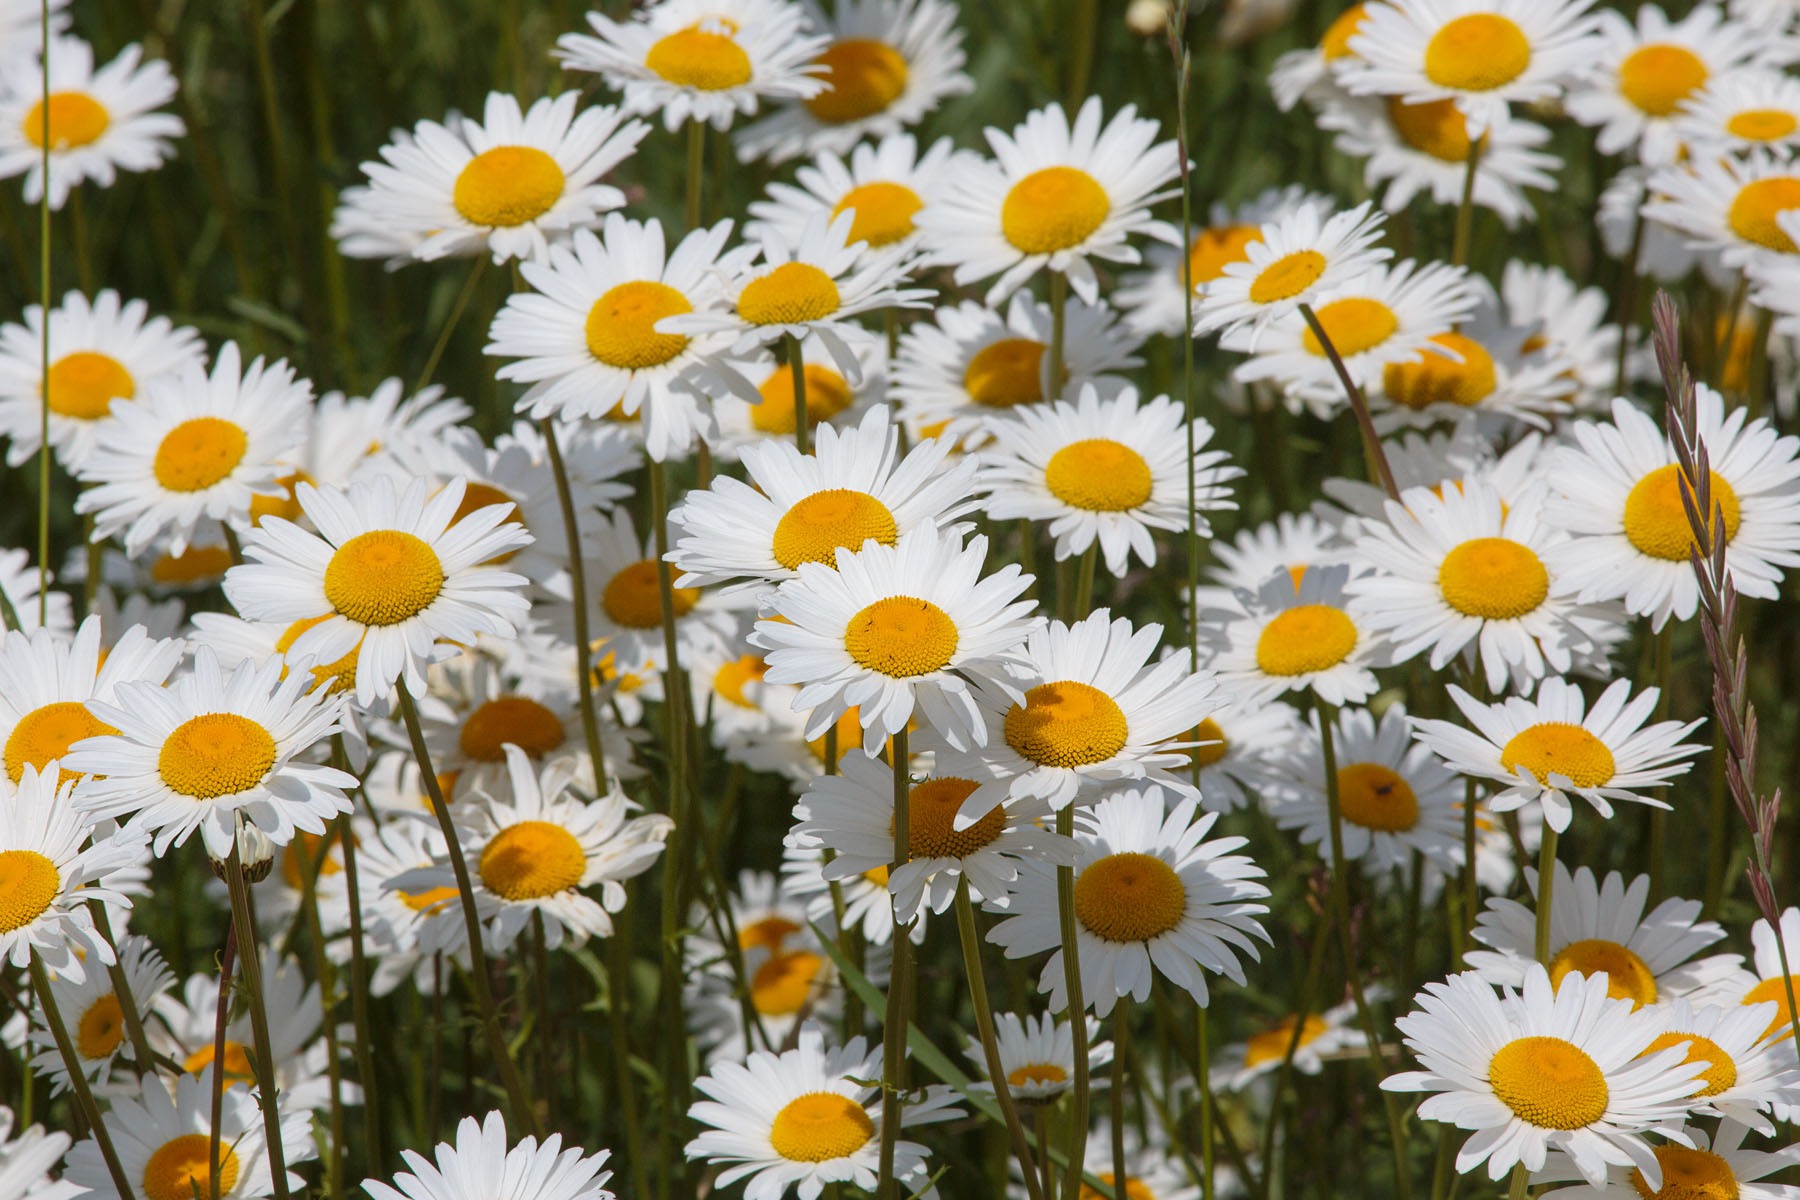 Daisies along the highway.  Click for next photo.